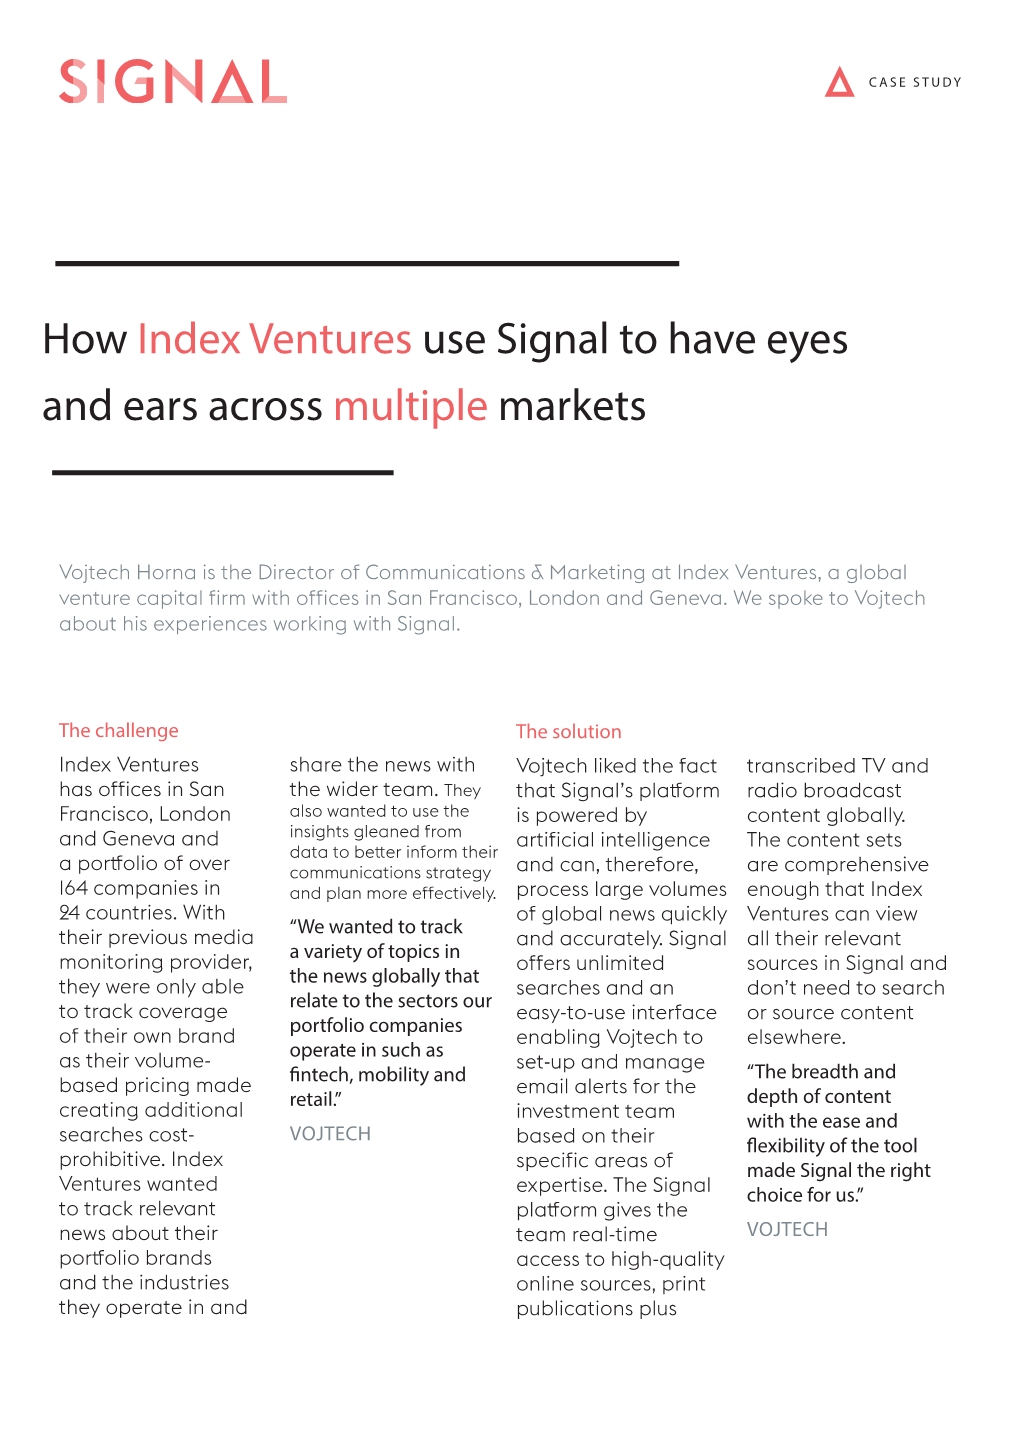 How Index Ventures Use Signal to Have Eyes and Ears Across Multiple Markets